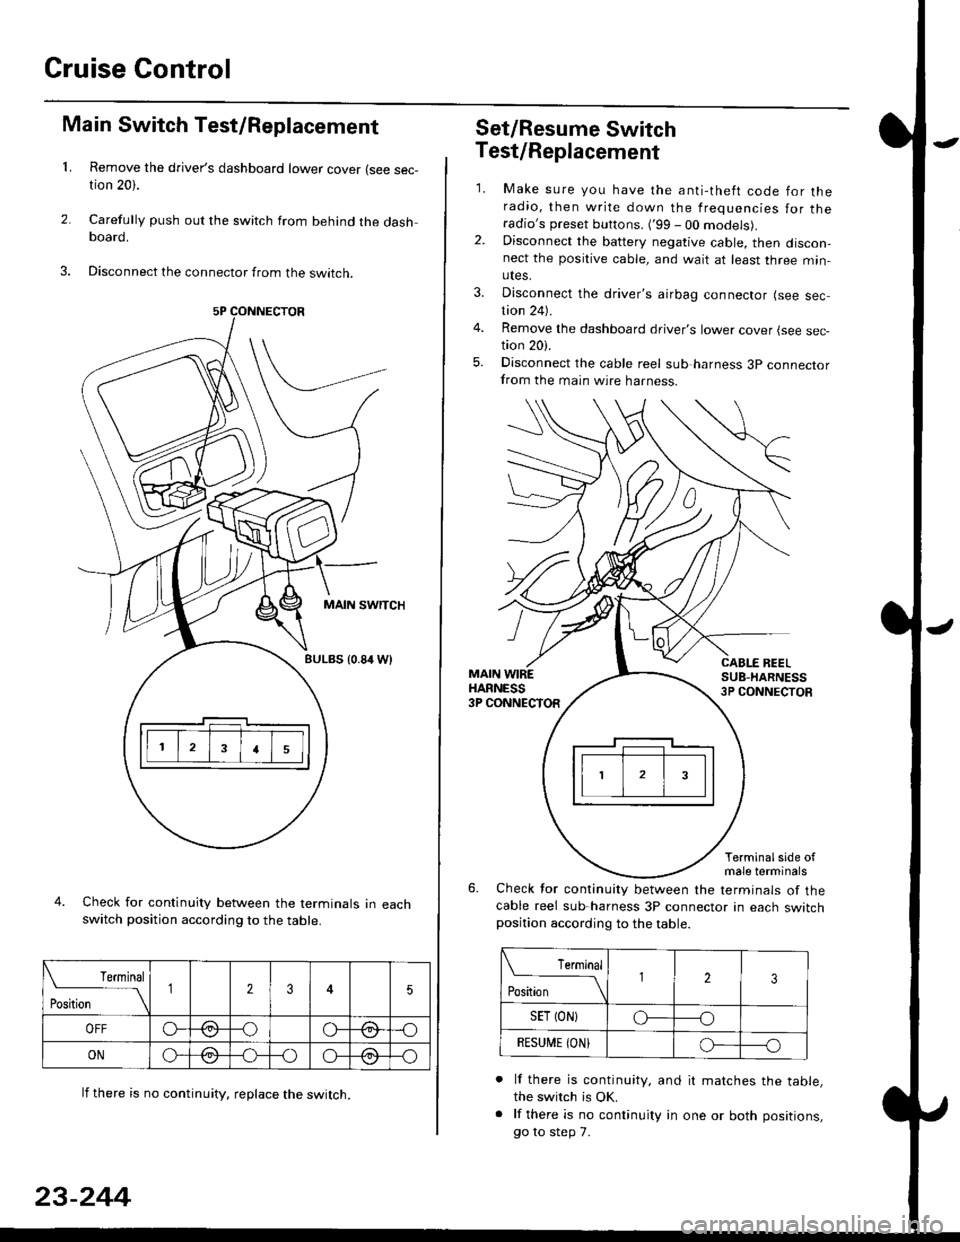 HONDA CIVIC 1997 6.G Owners Manual Cruise Gontrol
3.
1.
2.
Main Switch Test/Replacement
Remove the drivers dashboard lower cover (see sec-tion 20).
Carefully push out the switch from behind the dashboard.
Disconnect the connector from